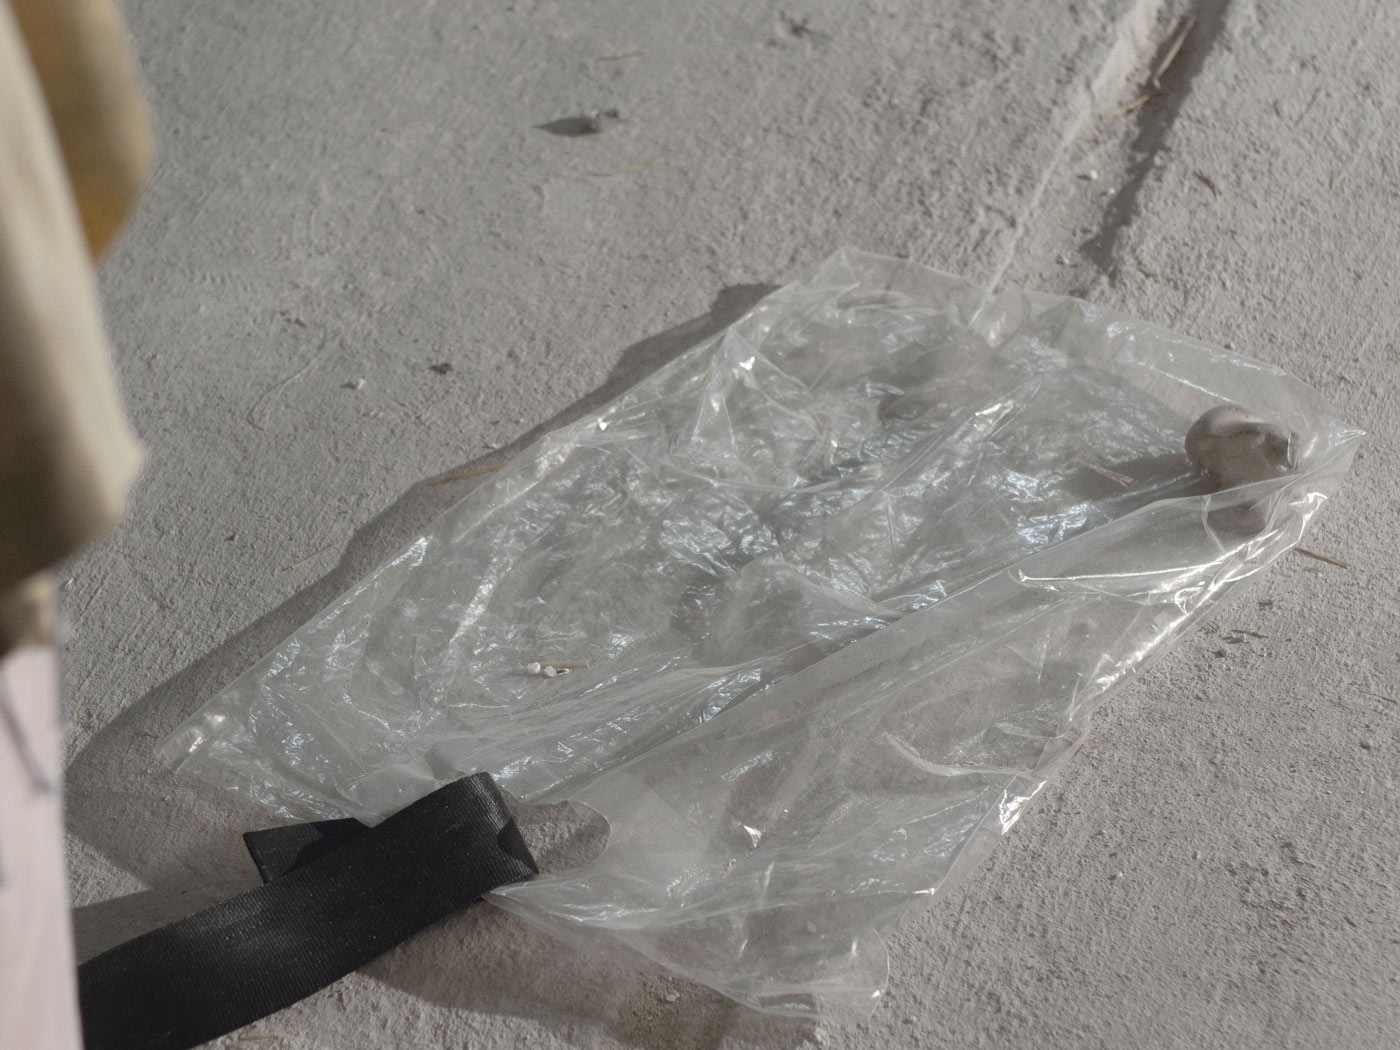 A transparent plastic bag held by a folded seatbelt. Inside the bag is a stone that is supposed to represent the asteroid 433 Eros.